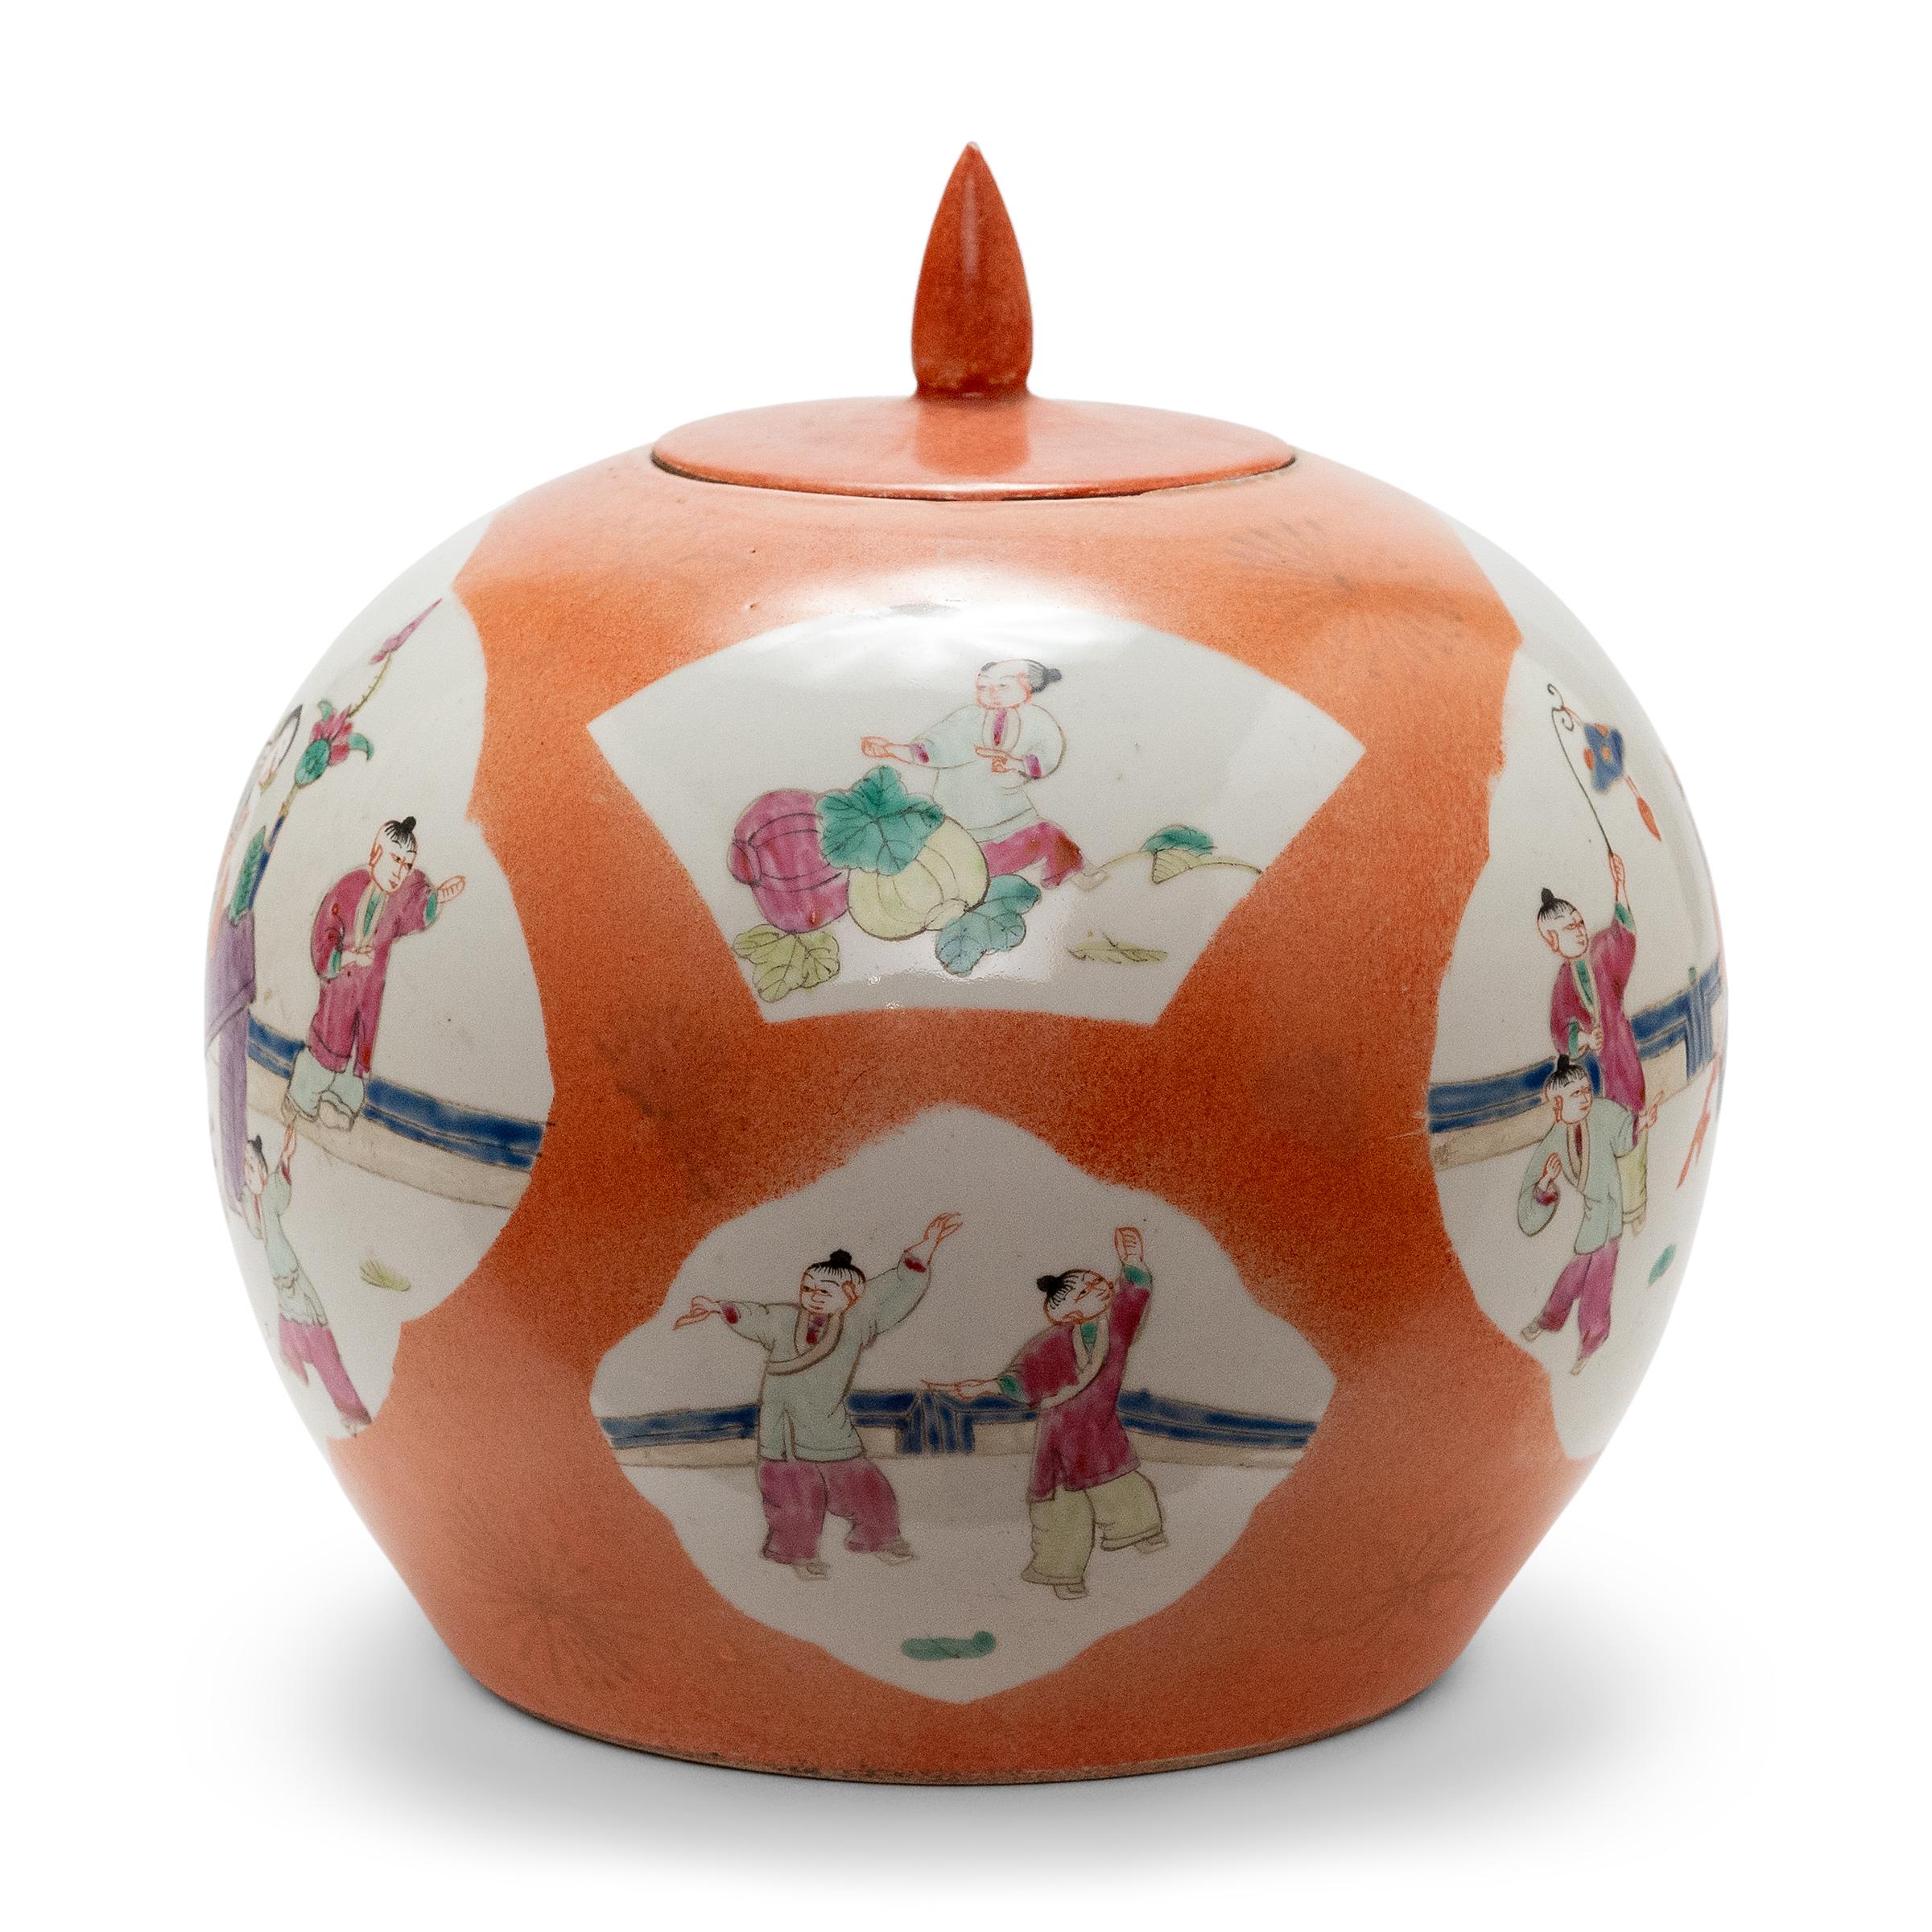 This phoenix tail vase is the perfect example of enduring Chinese symbolism and design. The body and flared neck of the vase bears a cartouche painting containing a picturesque scene. Each vignette displays a group of young boys in a traditional